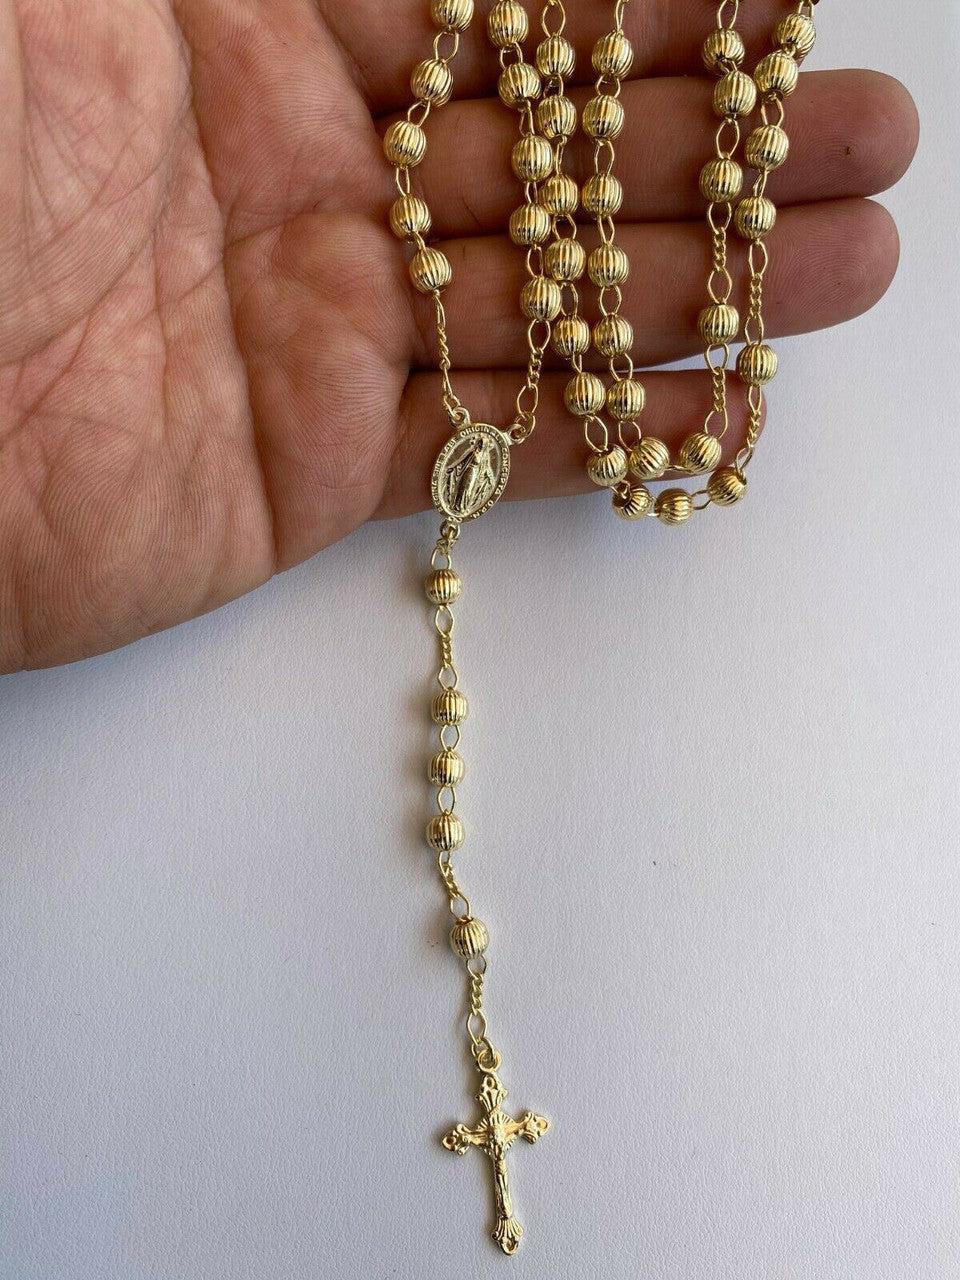 14k Gold Over Vermeil 925 Silver Men's Rosary Beads Necklace Rosario 6mm Diamond Moon Cut